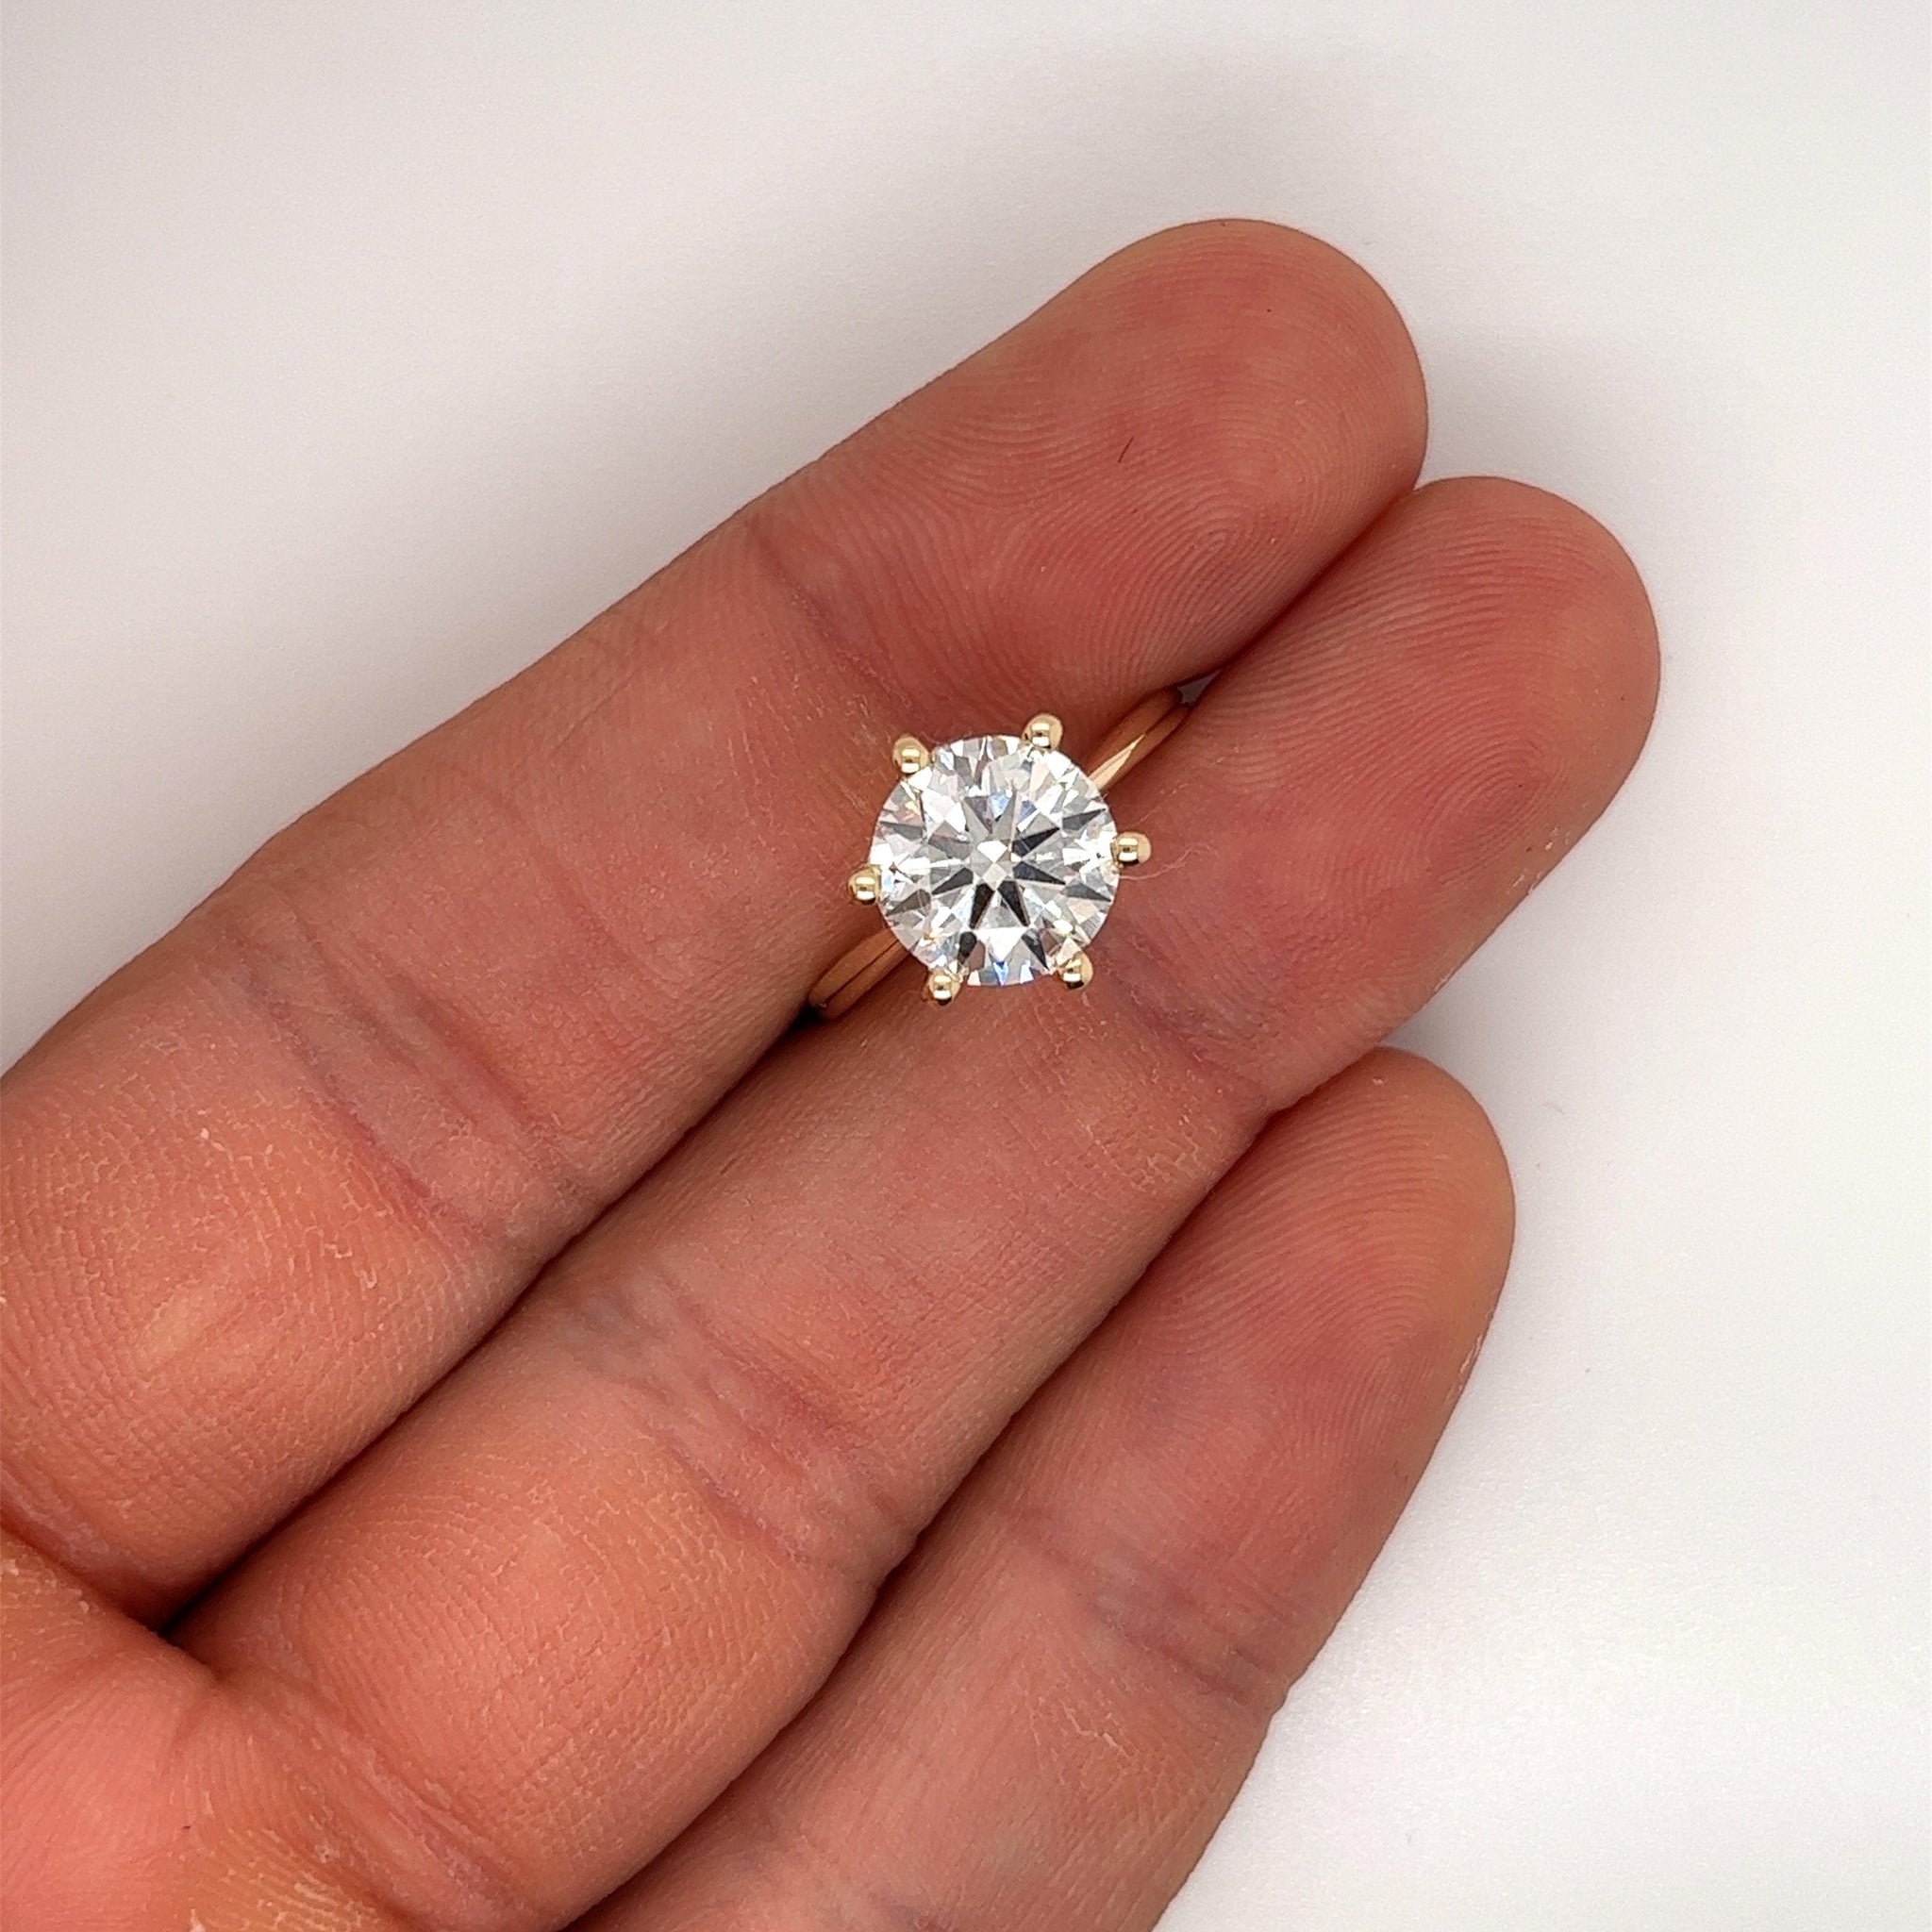 The most beautiful elongated cushion cut diamond ring. We cant stop  admiring this beauty! … | Dream engagement rings, Vintage engagement rings, Engagement  ring cuts